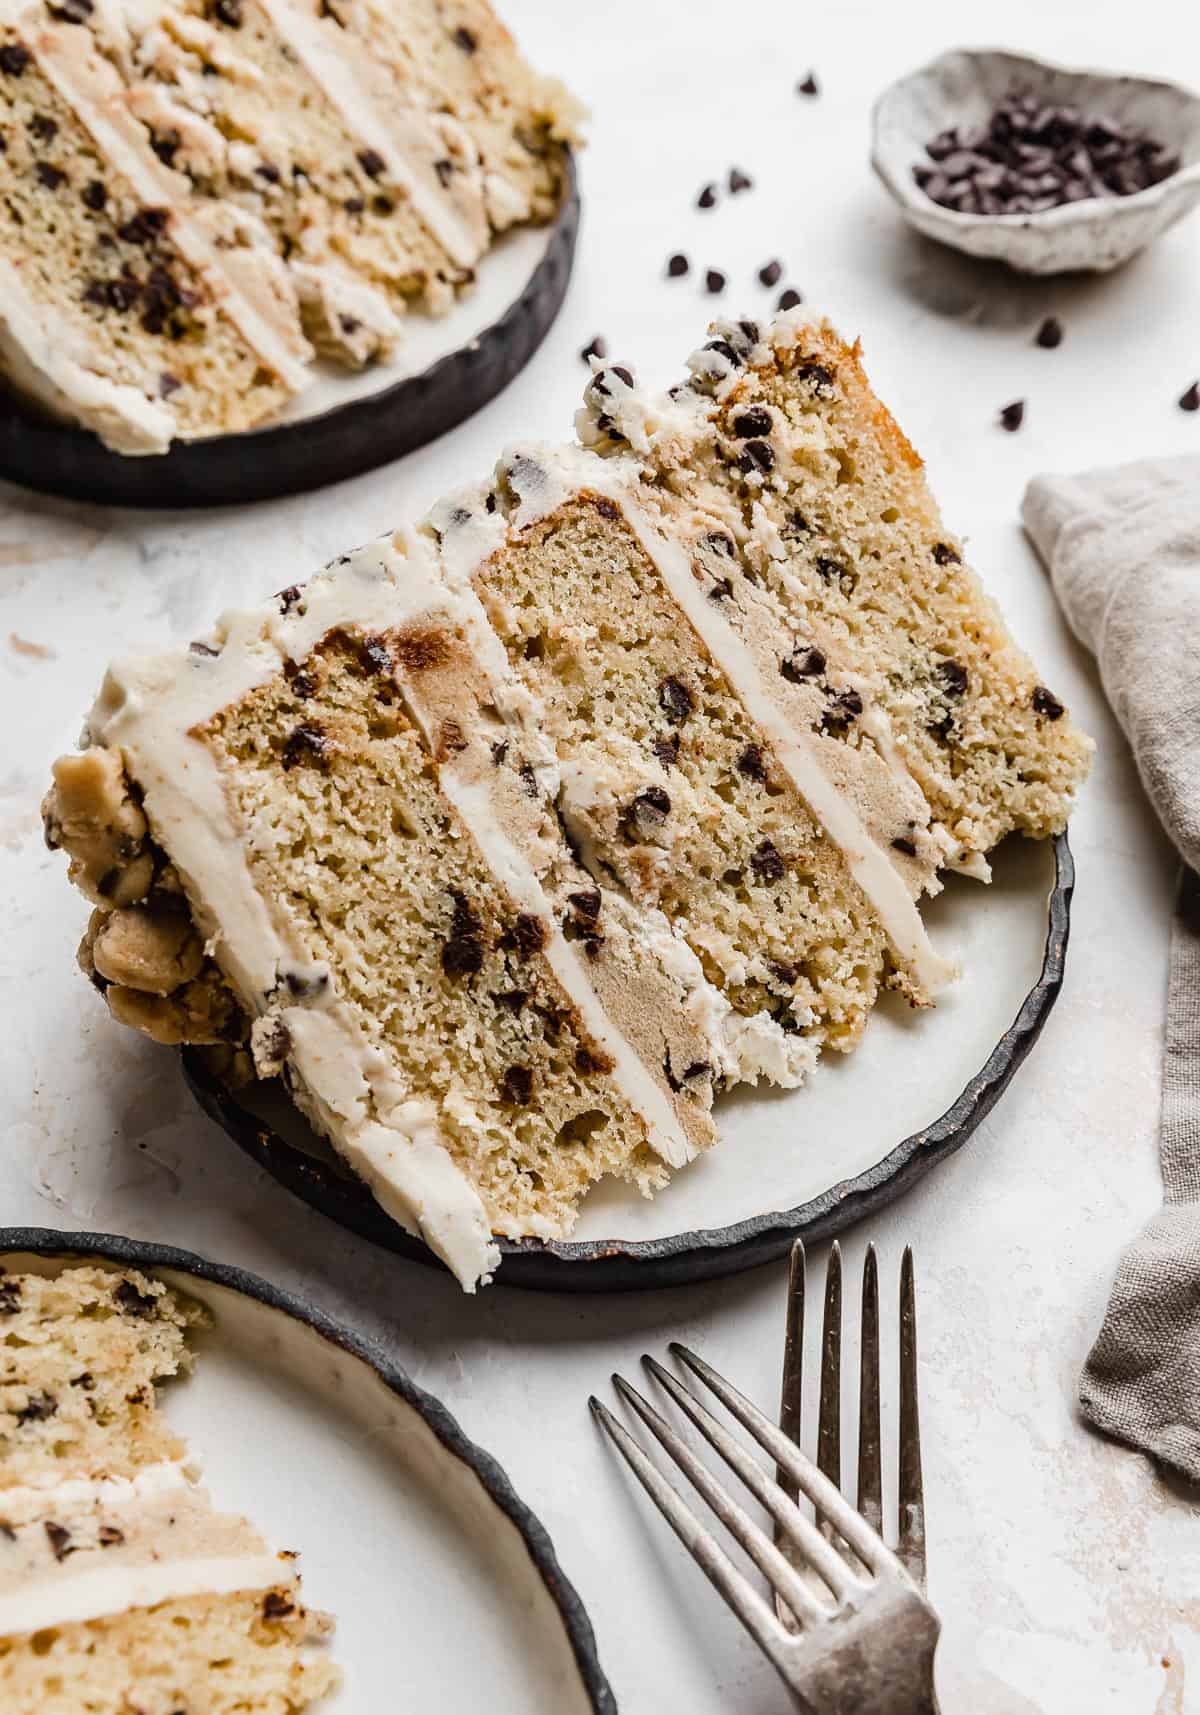 A slice of Cookie Dough Cake that has edible cookie dough between each cake layer, on a black rimmed white plate.